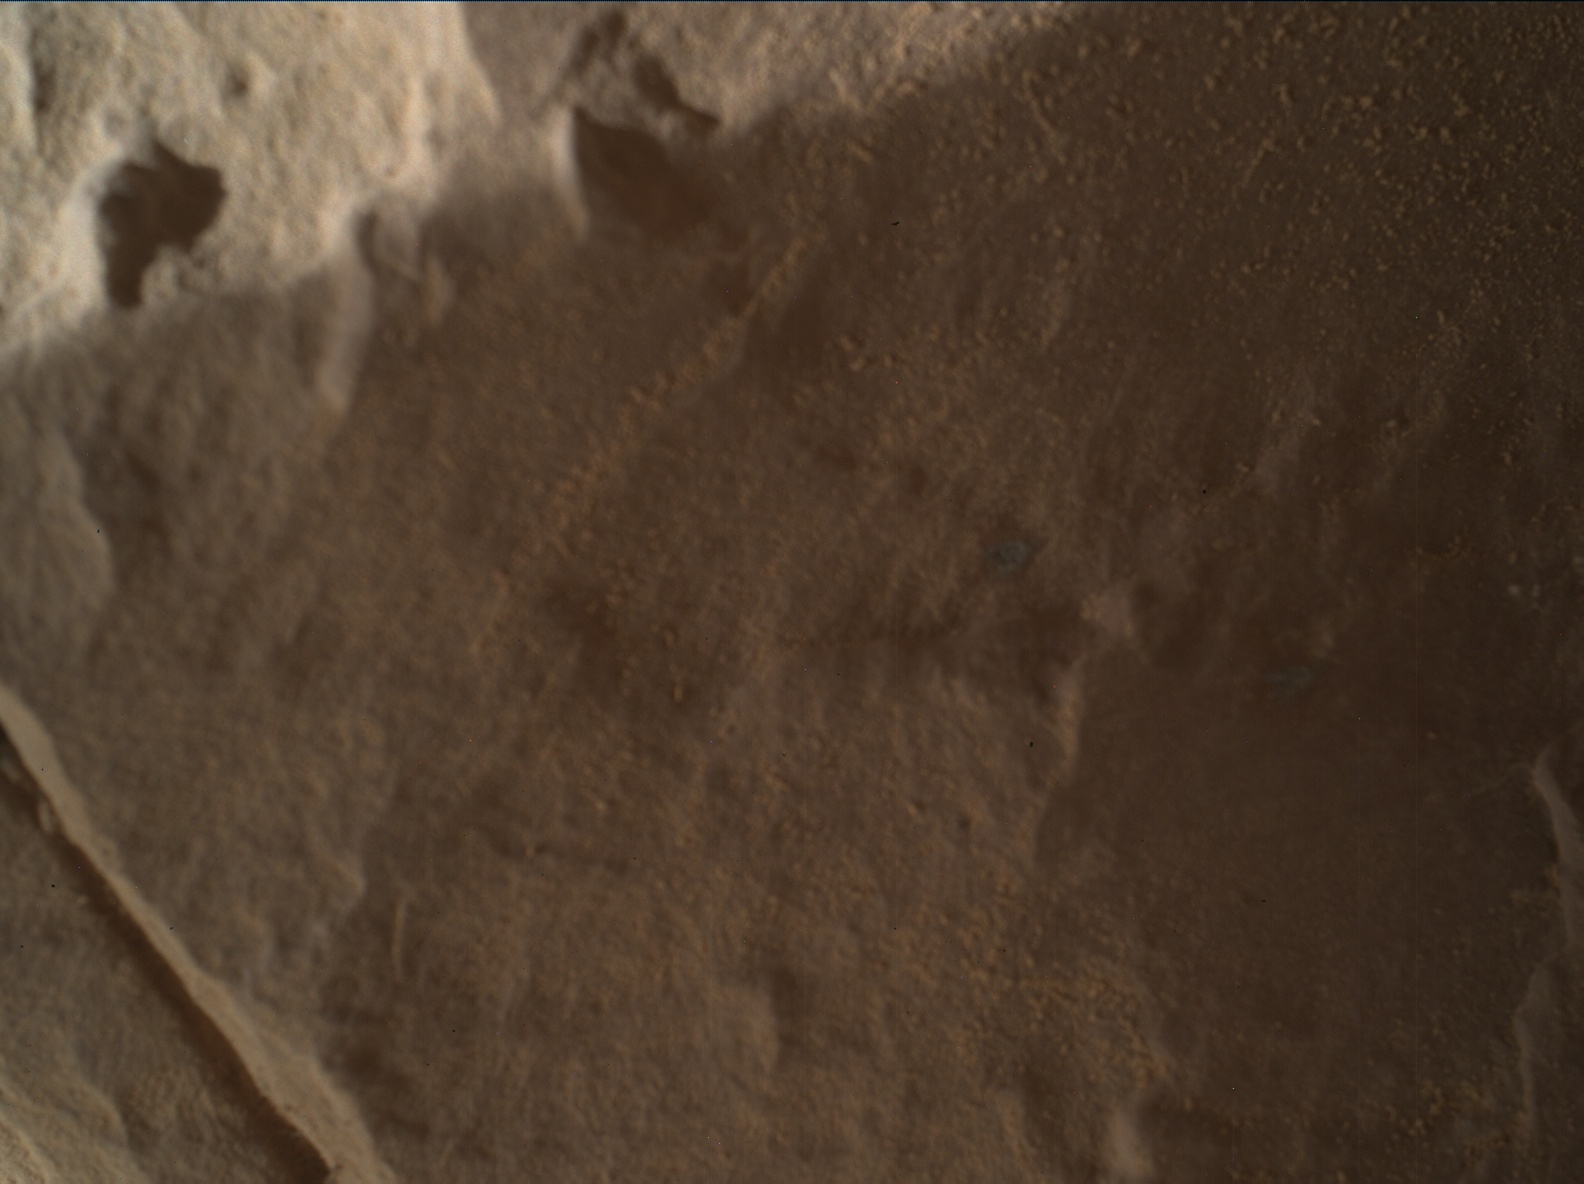 Nasa's Mars rover Curiosity acquired this image using its Mars Hand Lens Imager (MAHLI) on Sol 2001